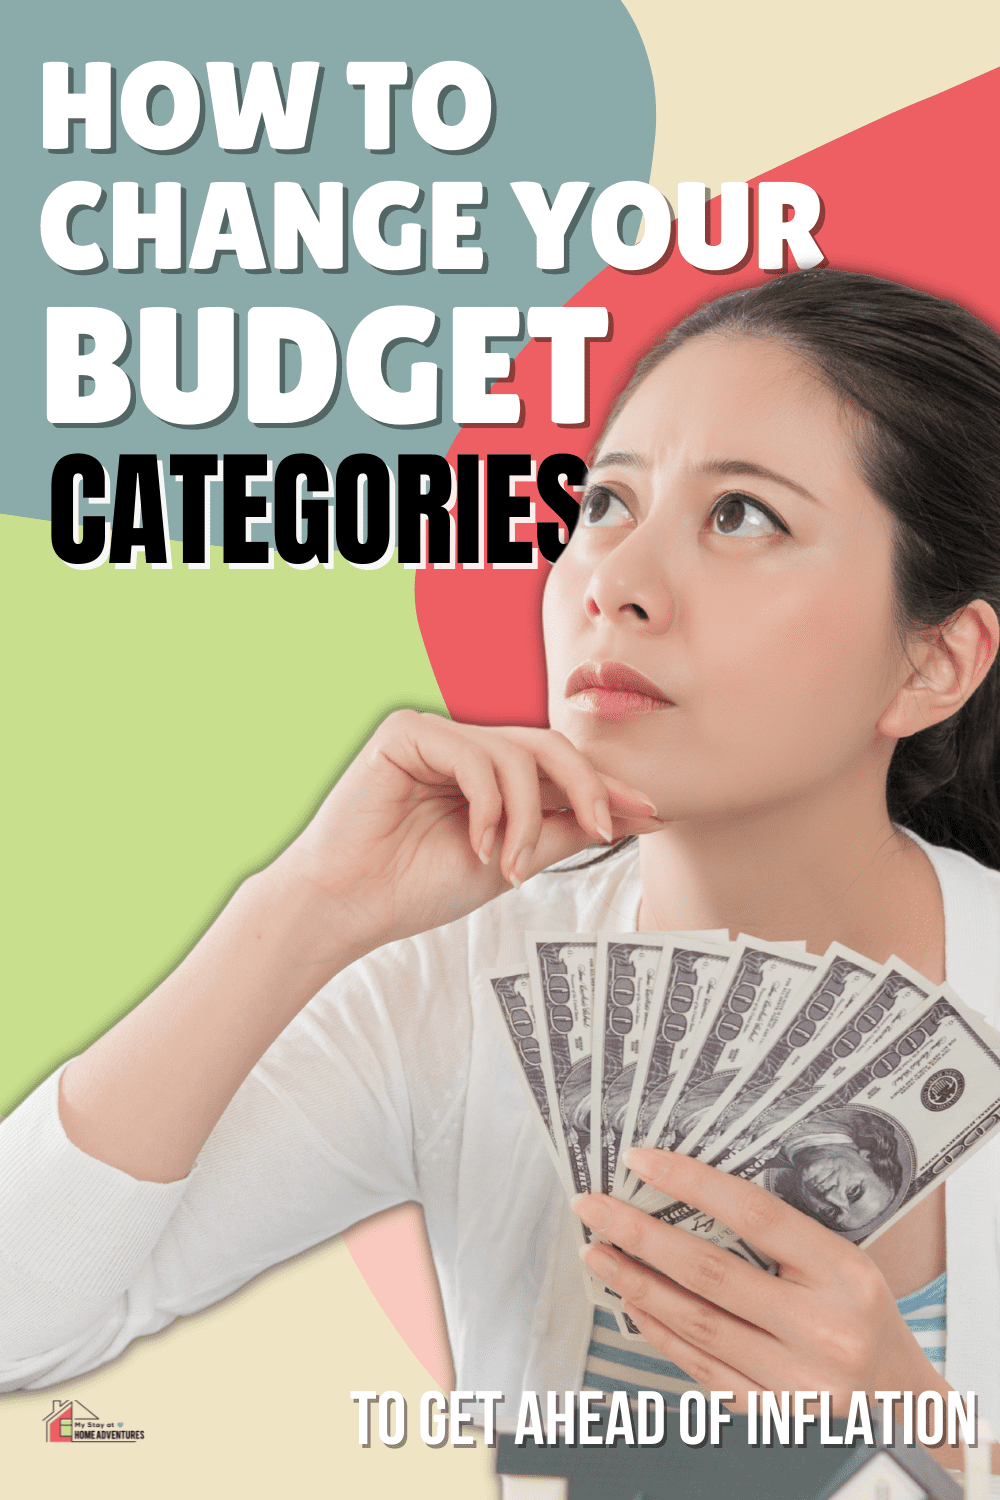 This article will teach you how to change your budget categories to be a better fit for your family due to inflation. via @mystayathome